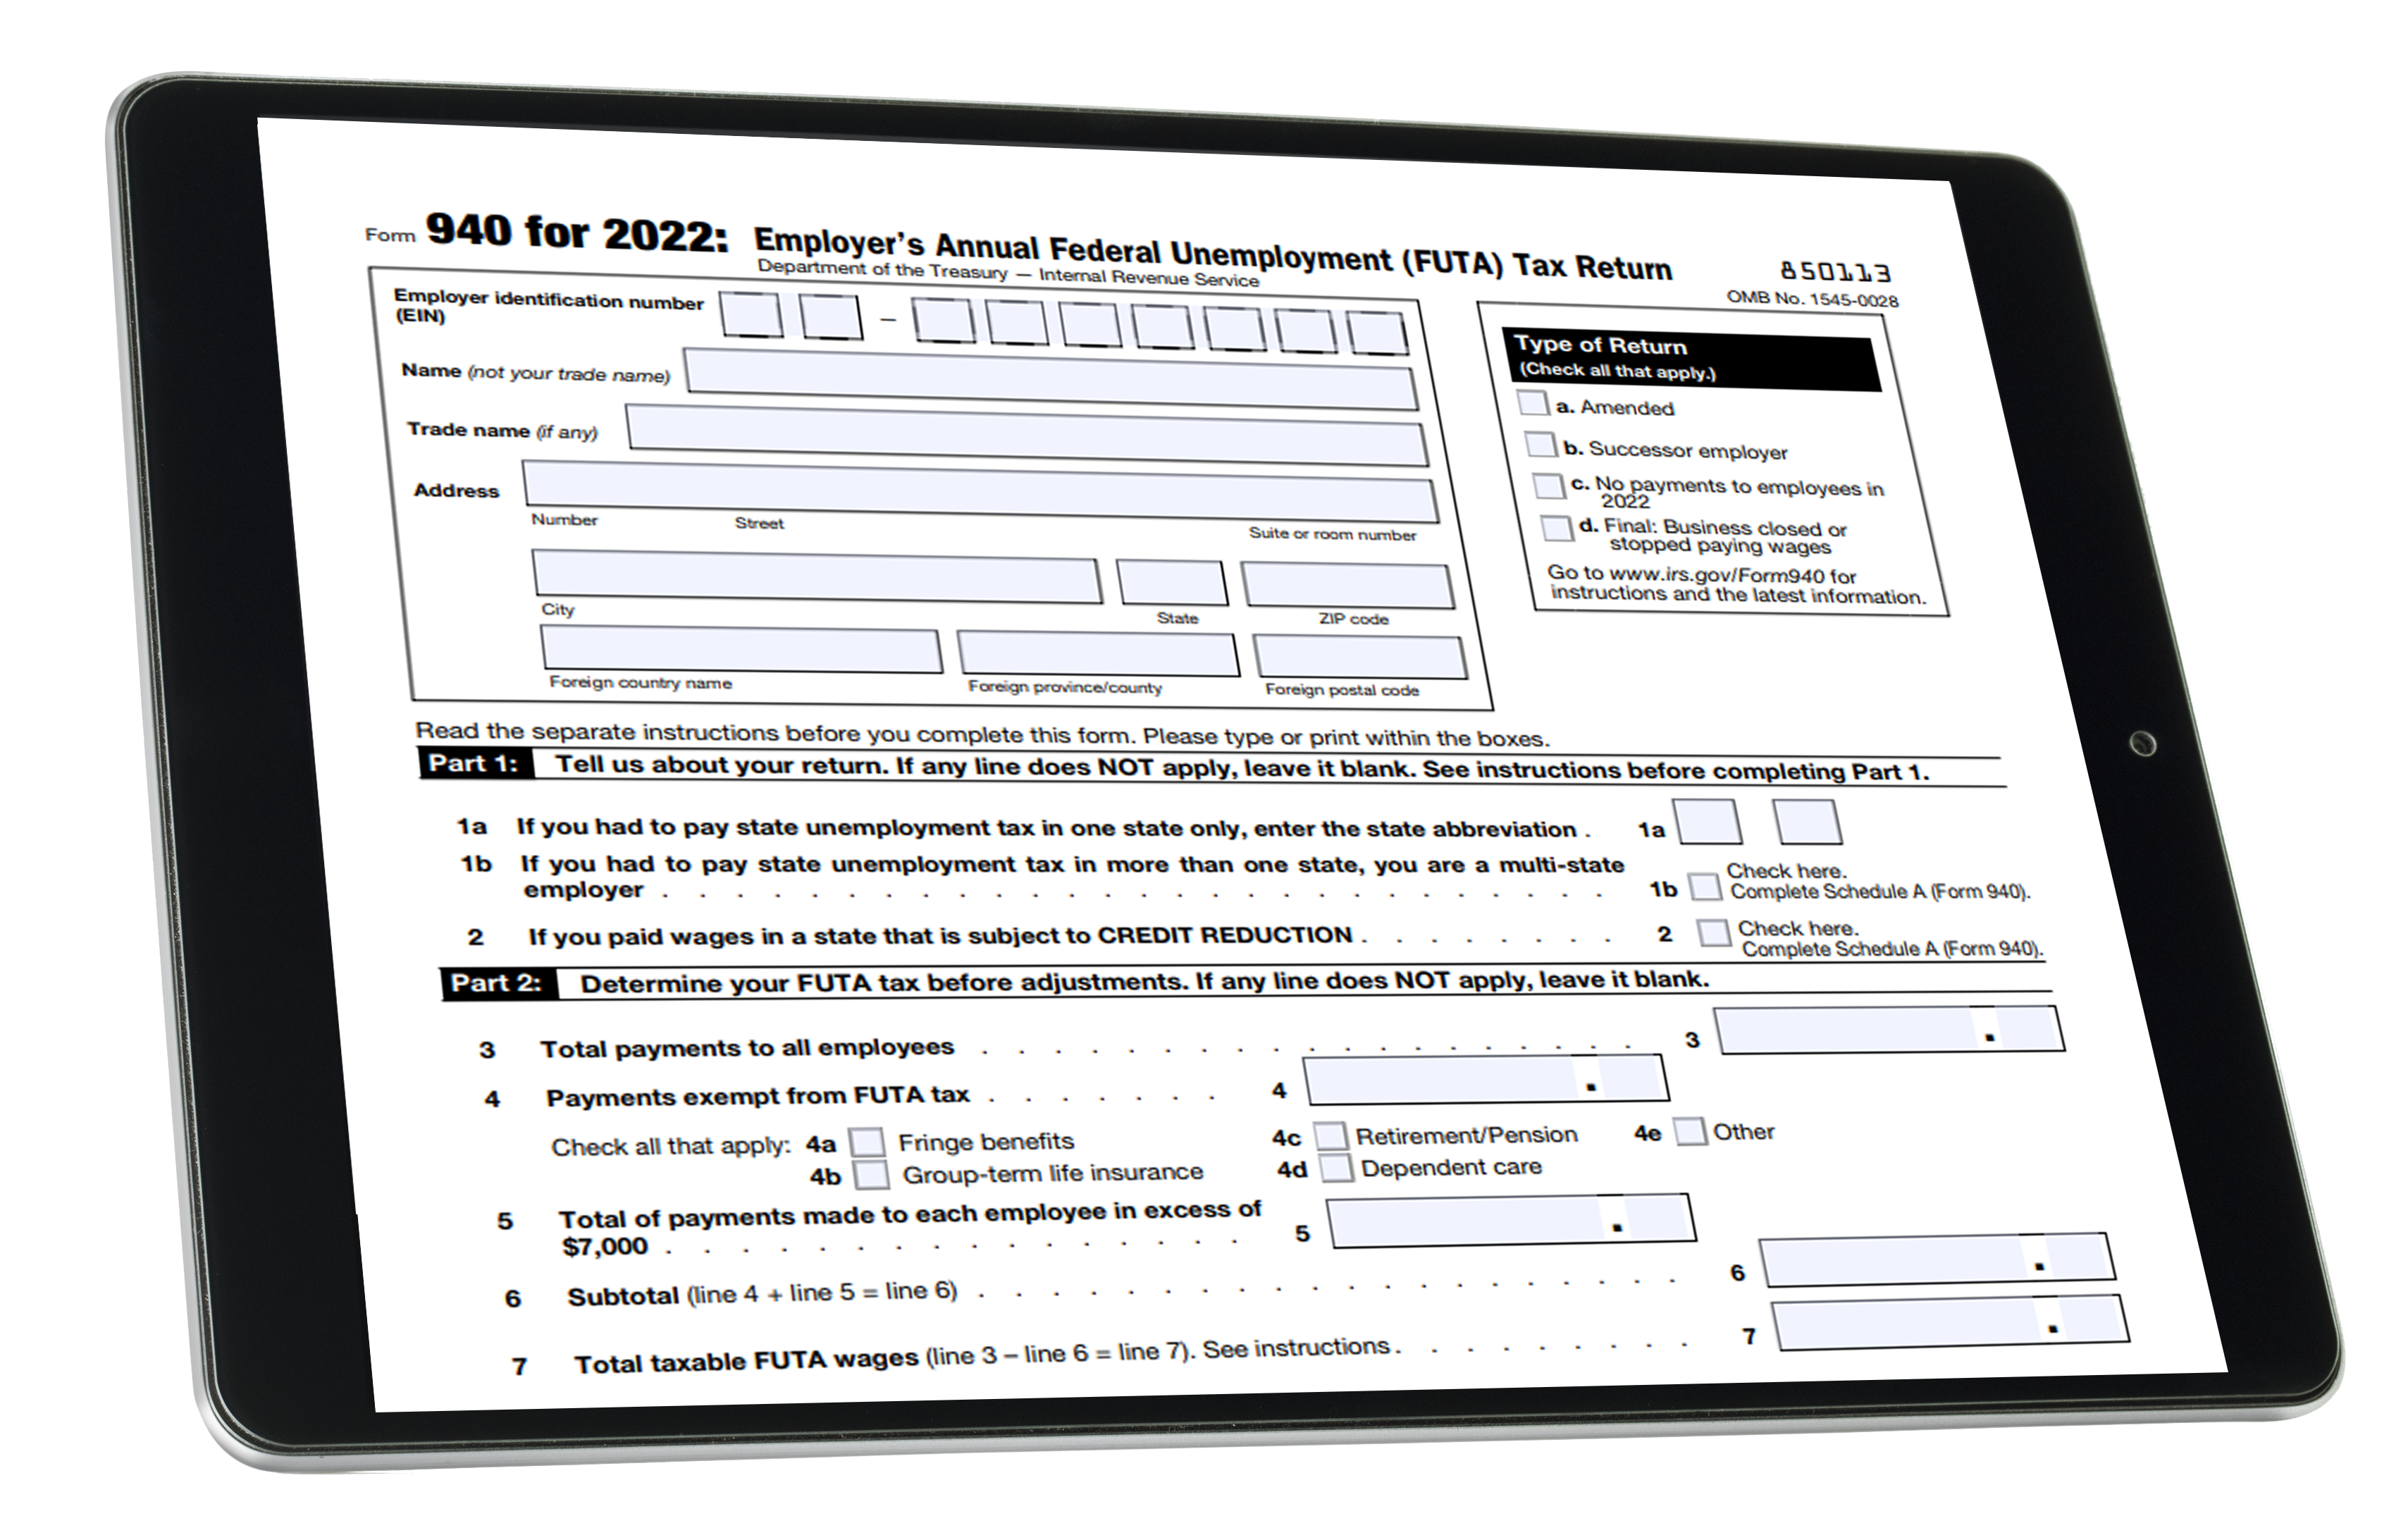 IRS Form 940 for 2022